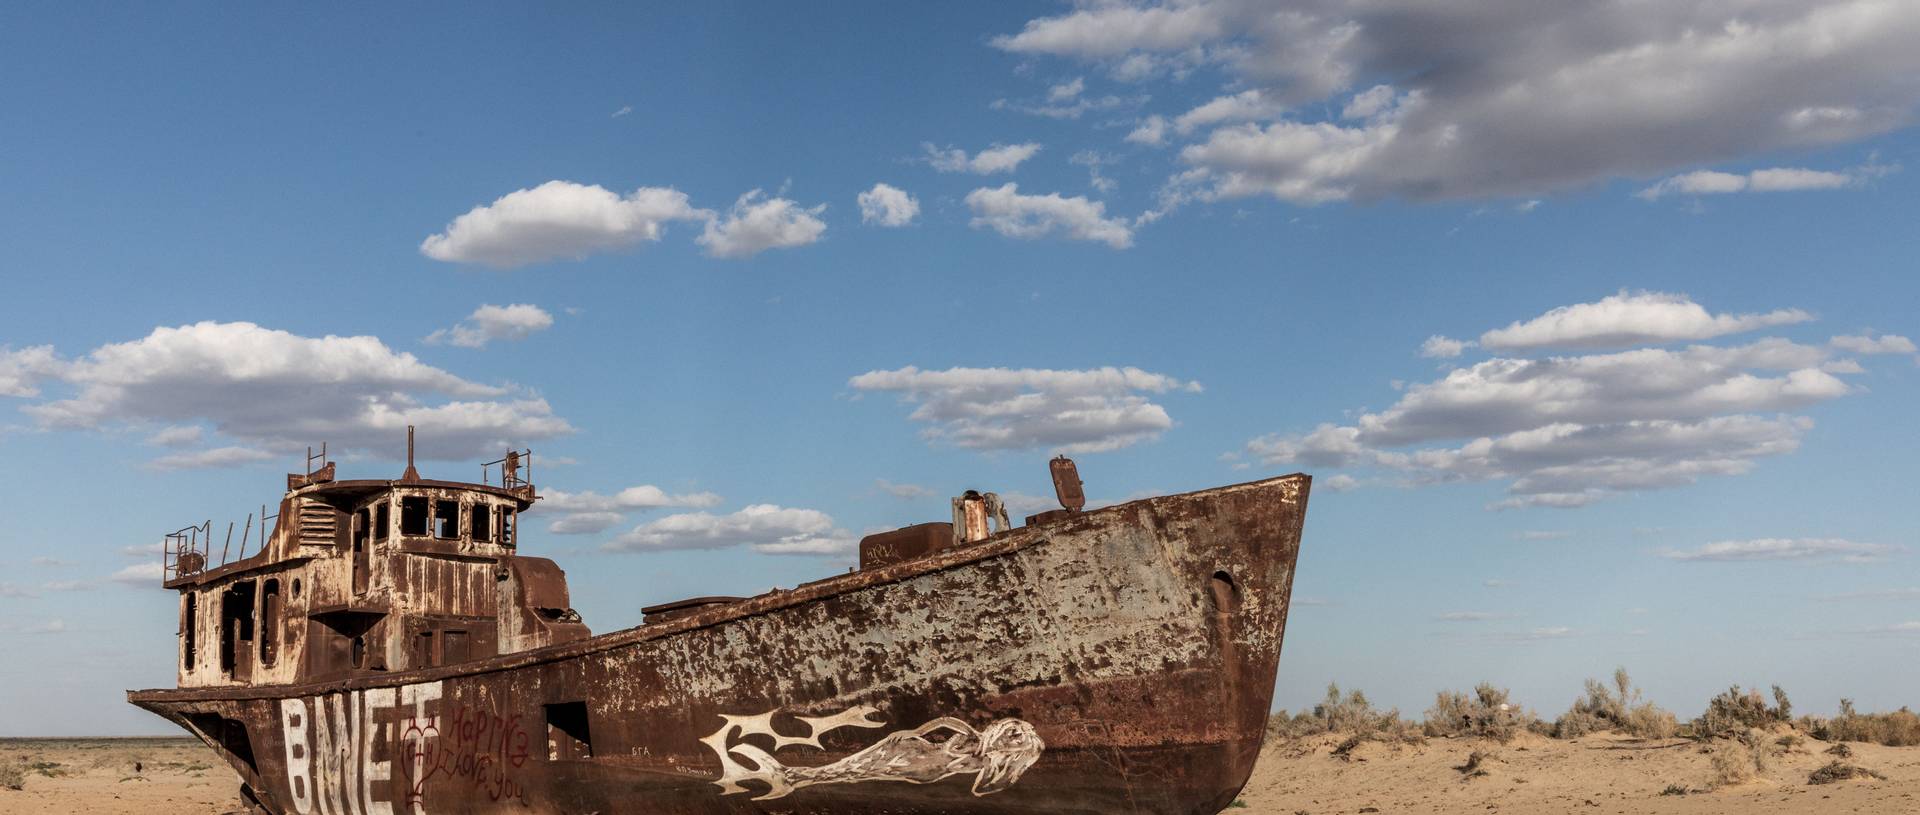 Viciting The Aral Sea